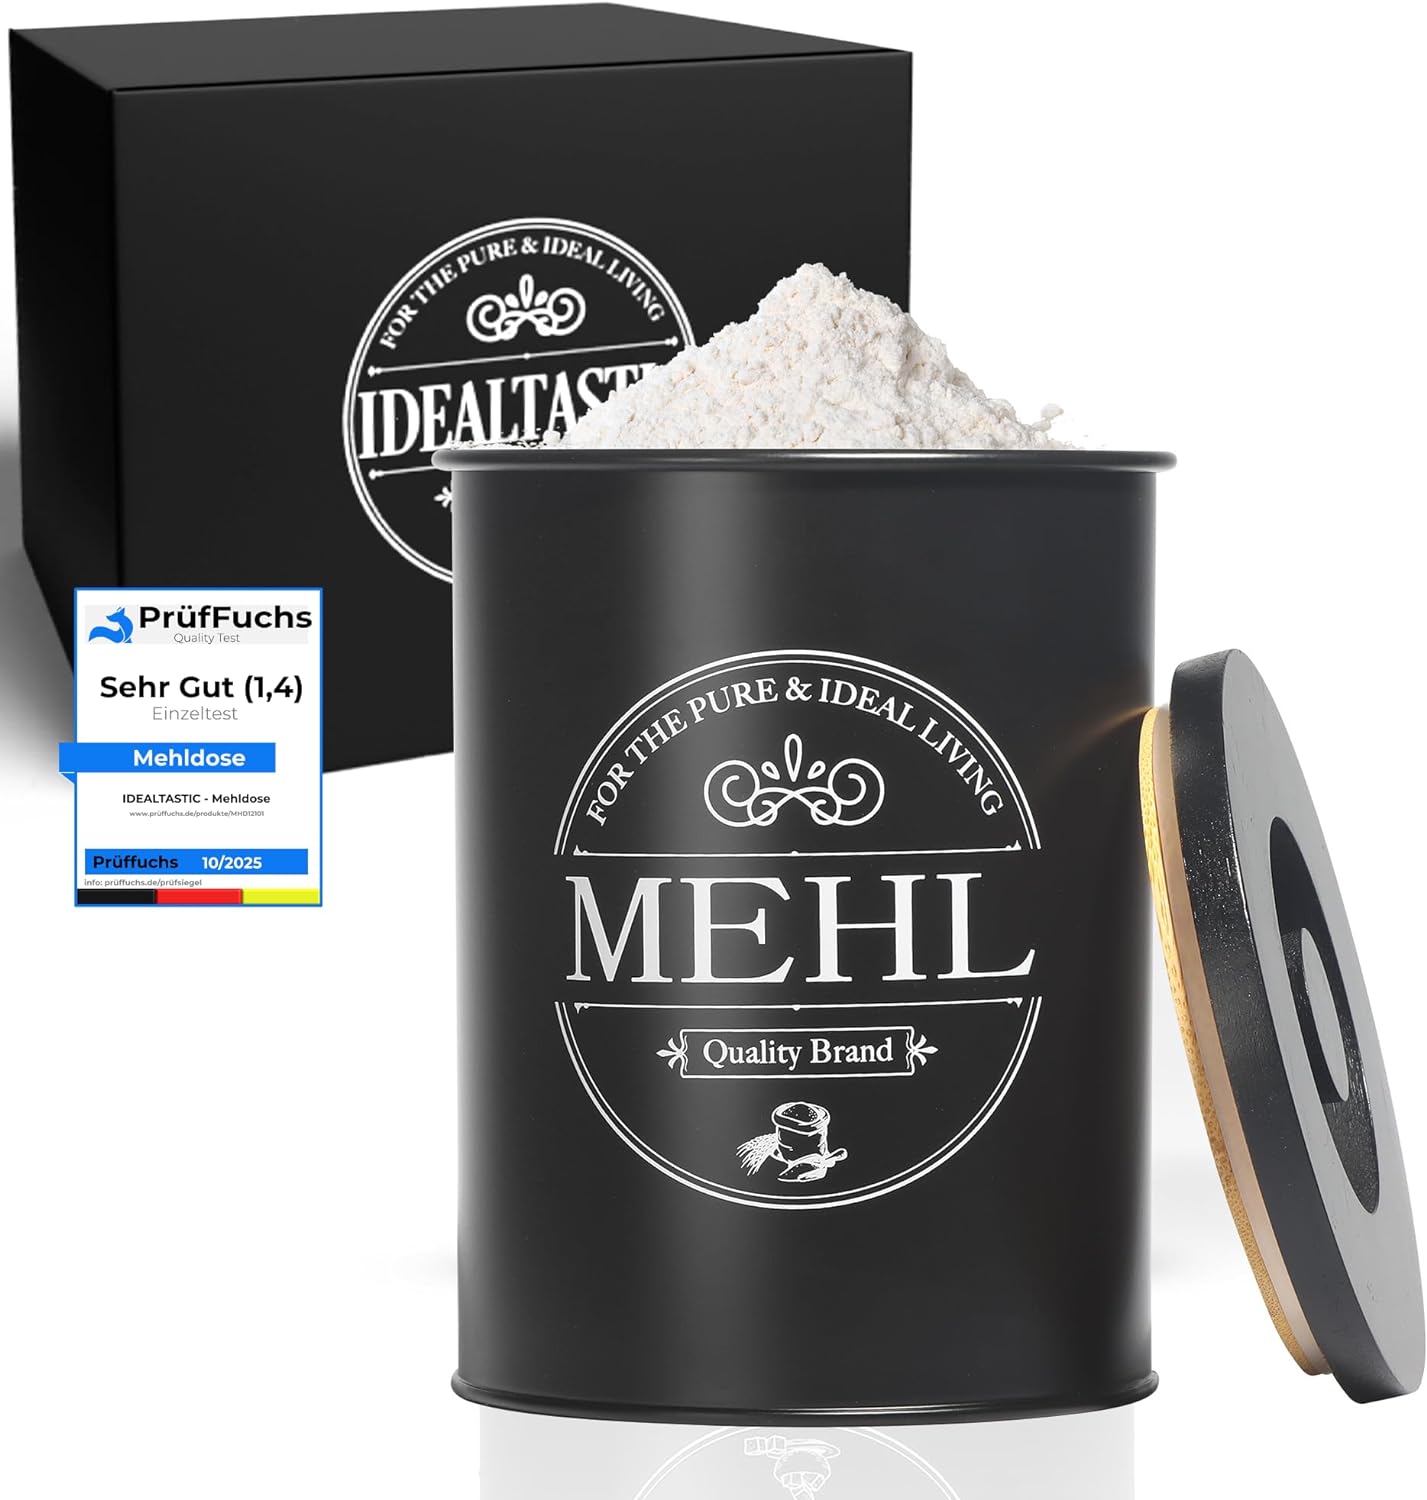 IDEALTASTIC® Premium Flour Storage Black, Airtight Flour Box 500 g for the Kitchen, Robust Flour Container with Time-Saving Lid, Flour Box with Lid, Food-Tested Storage Container Flour
